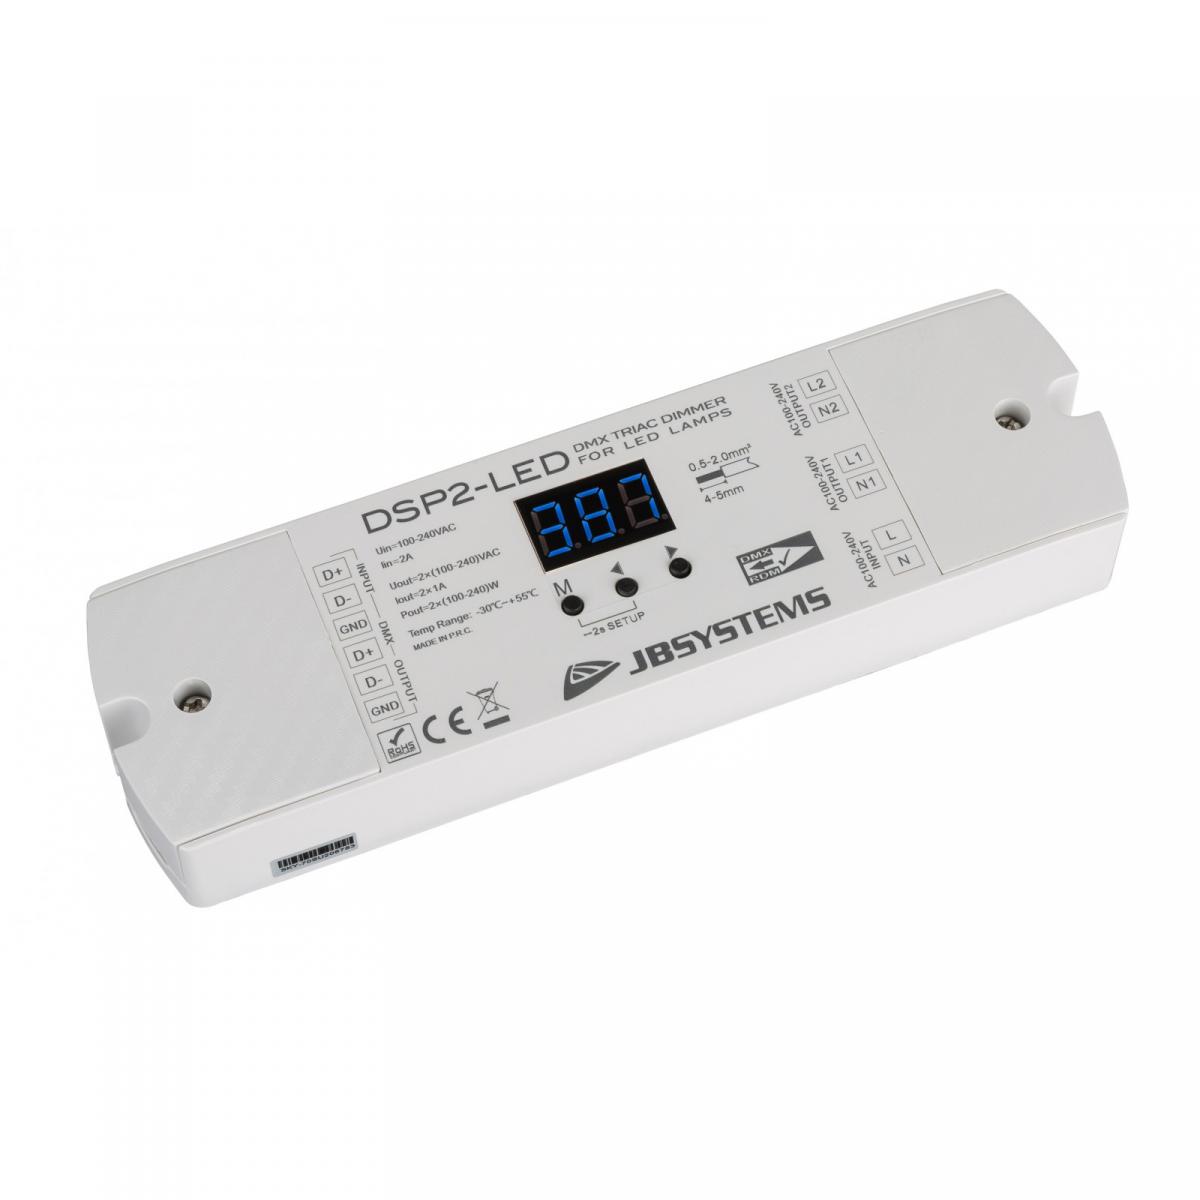 JB Systems DSP2-LED Dimmer